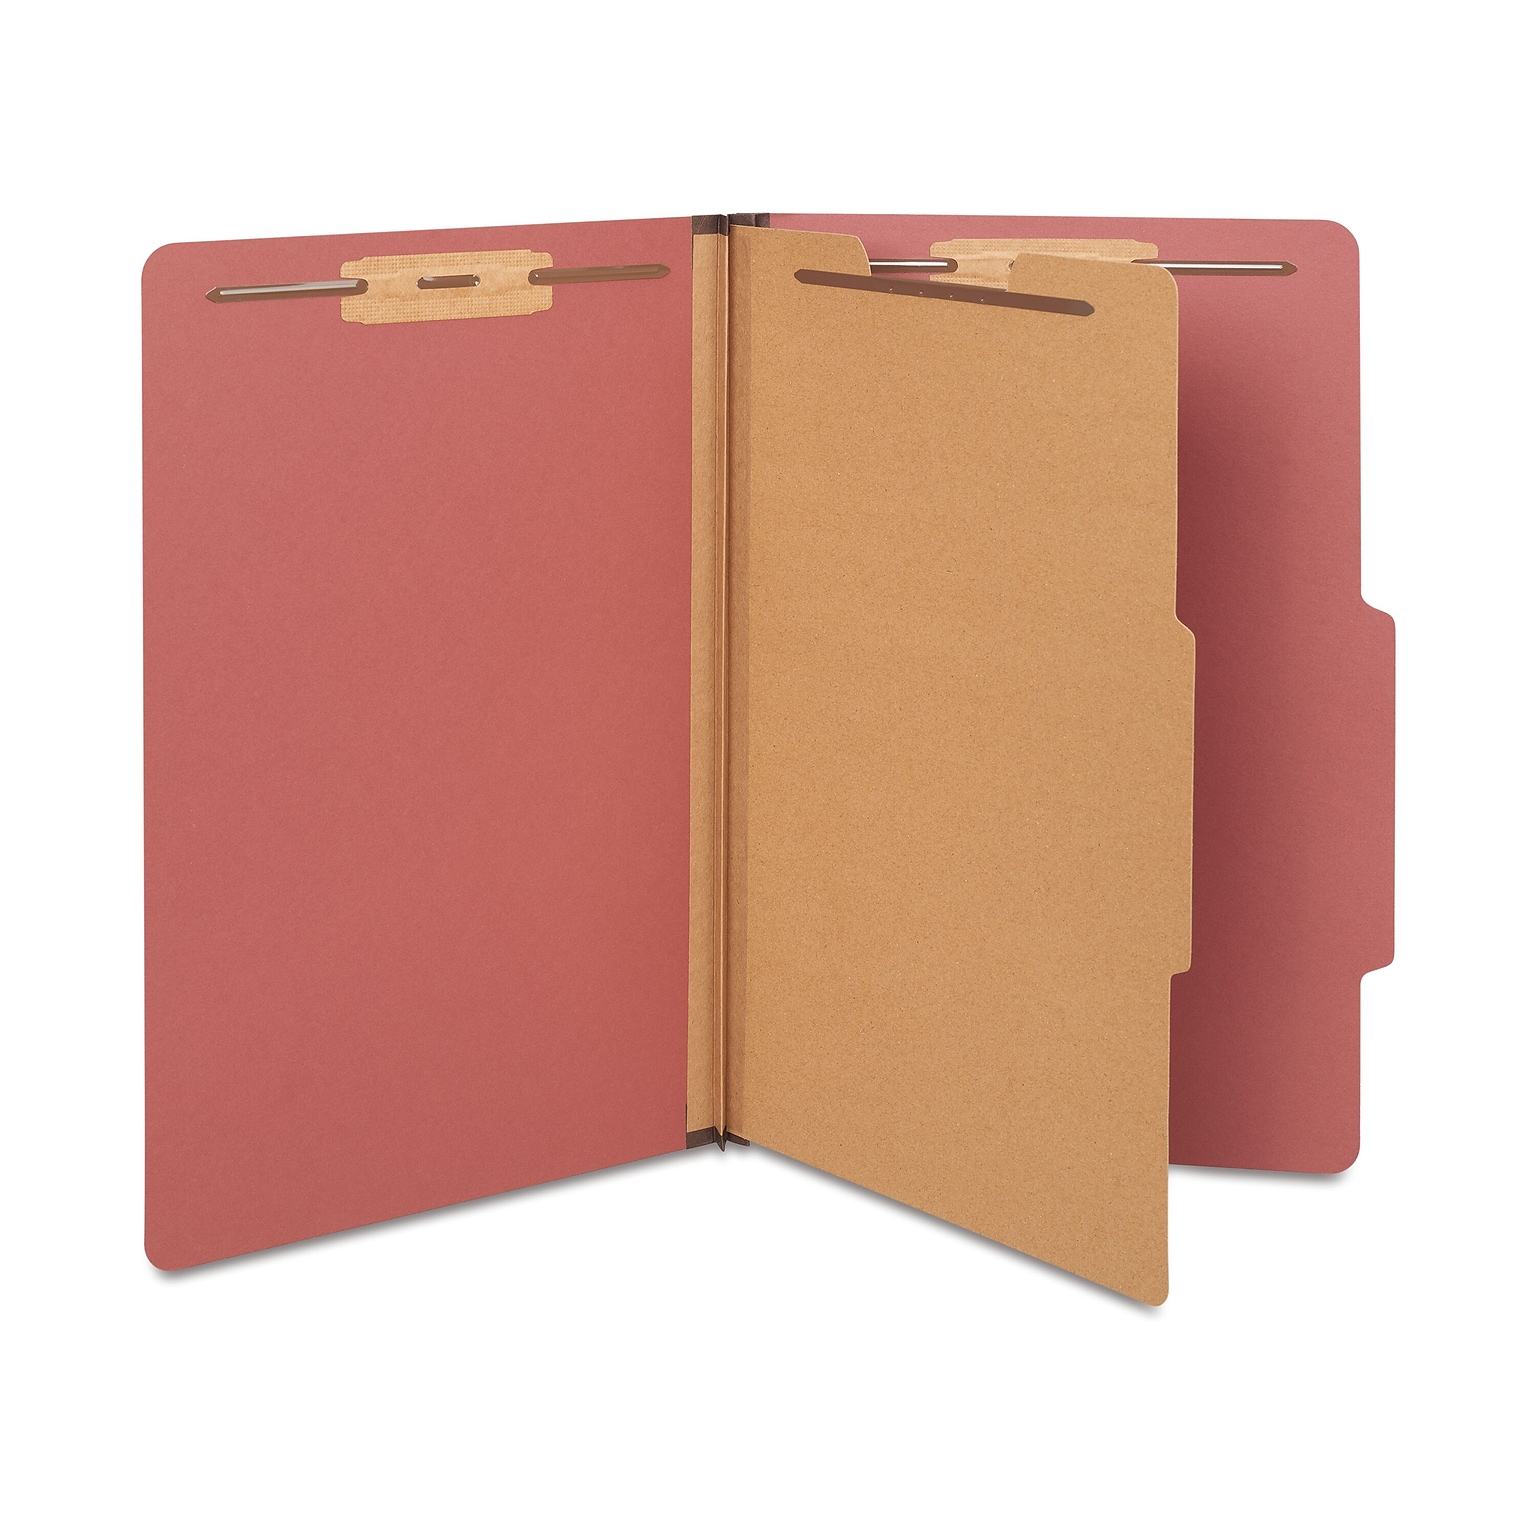 Staples 60% Recycled Pressboard Classification Folder, 1-Divider, 1.75 Expansion, Legal Size, Brick Red, 20/Box